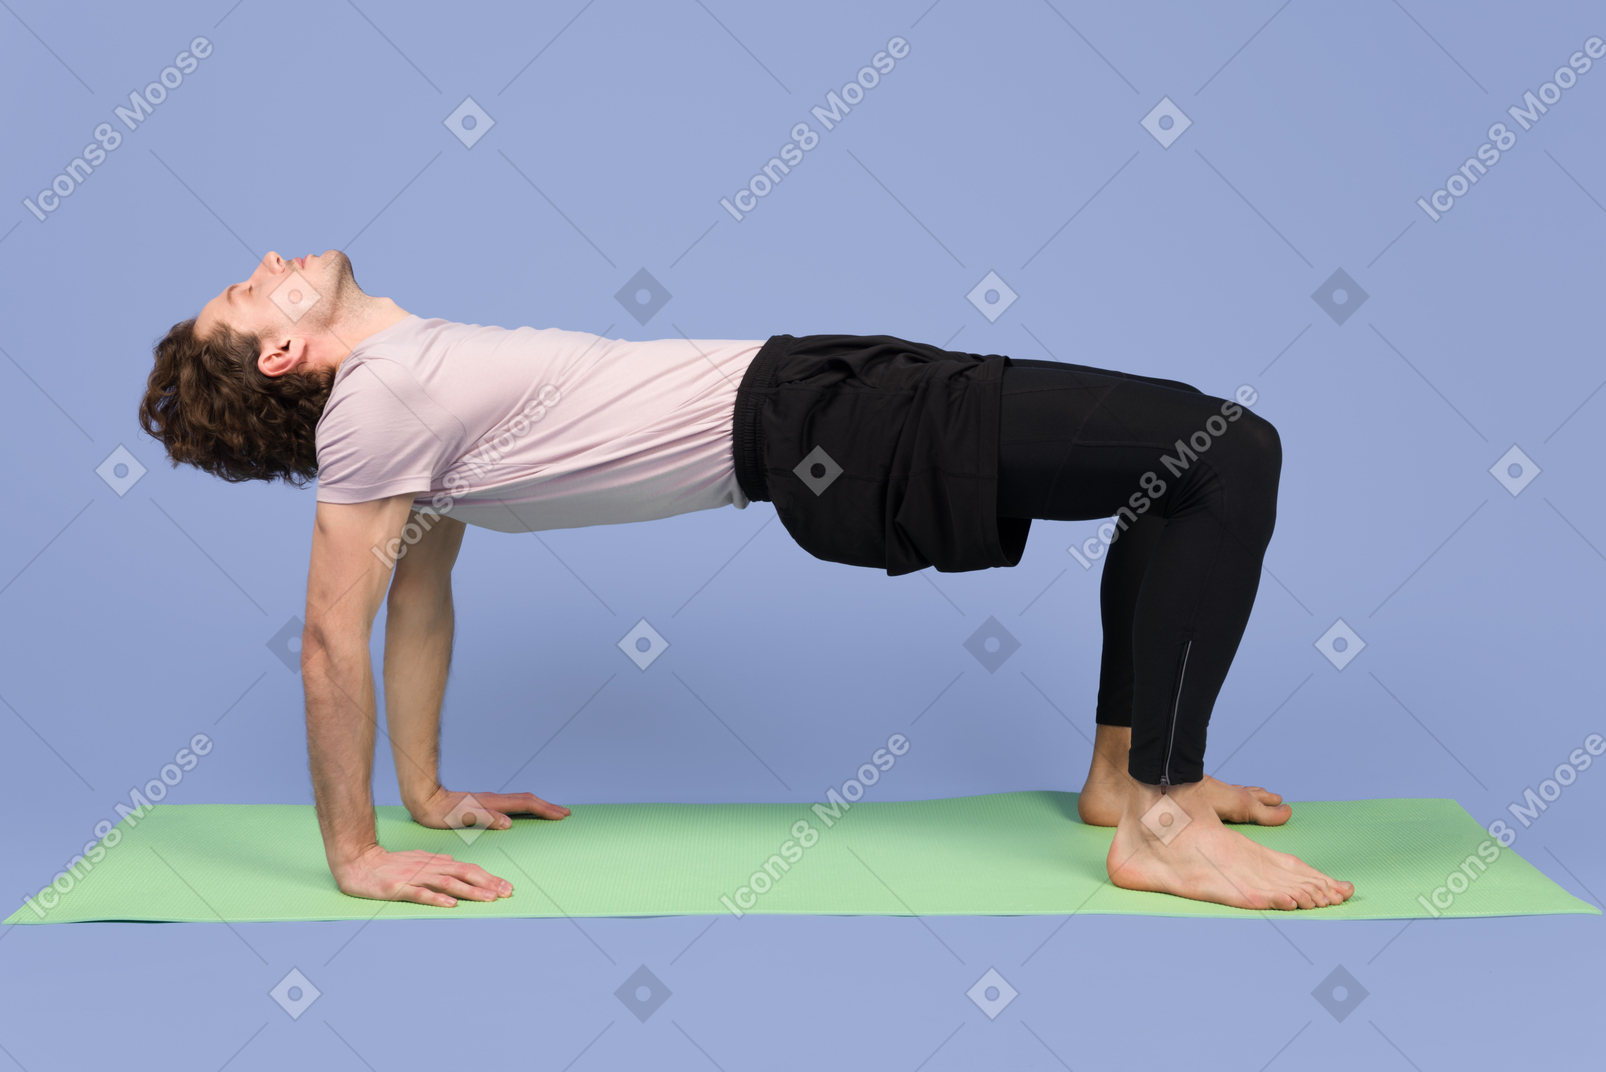 Handsome young man standing on his legs and hands on yoga mat